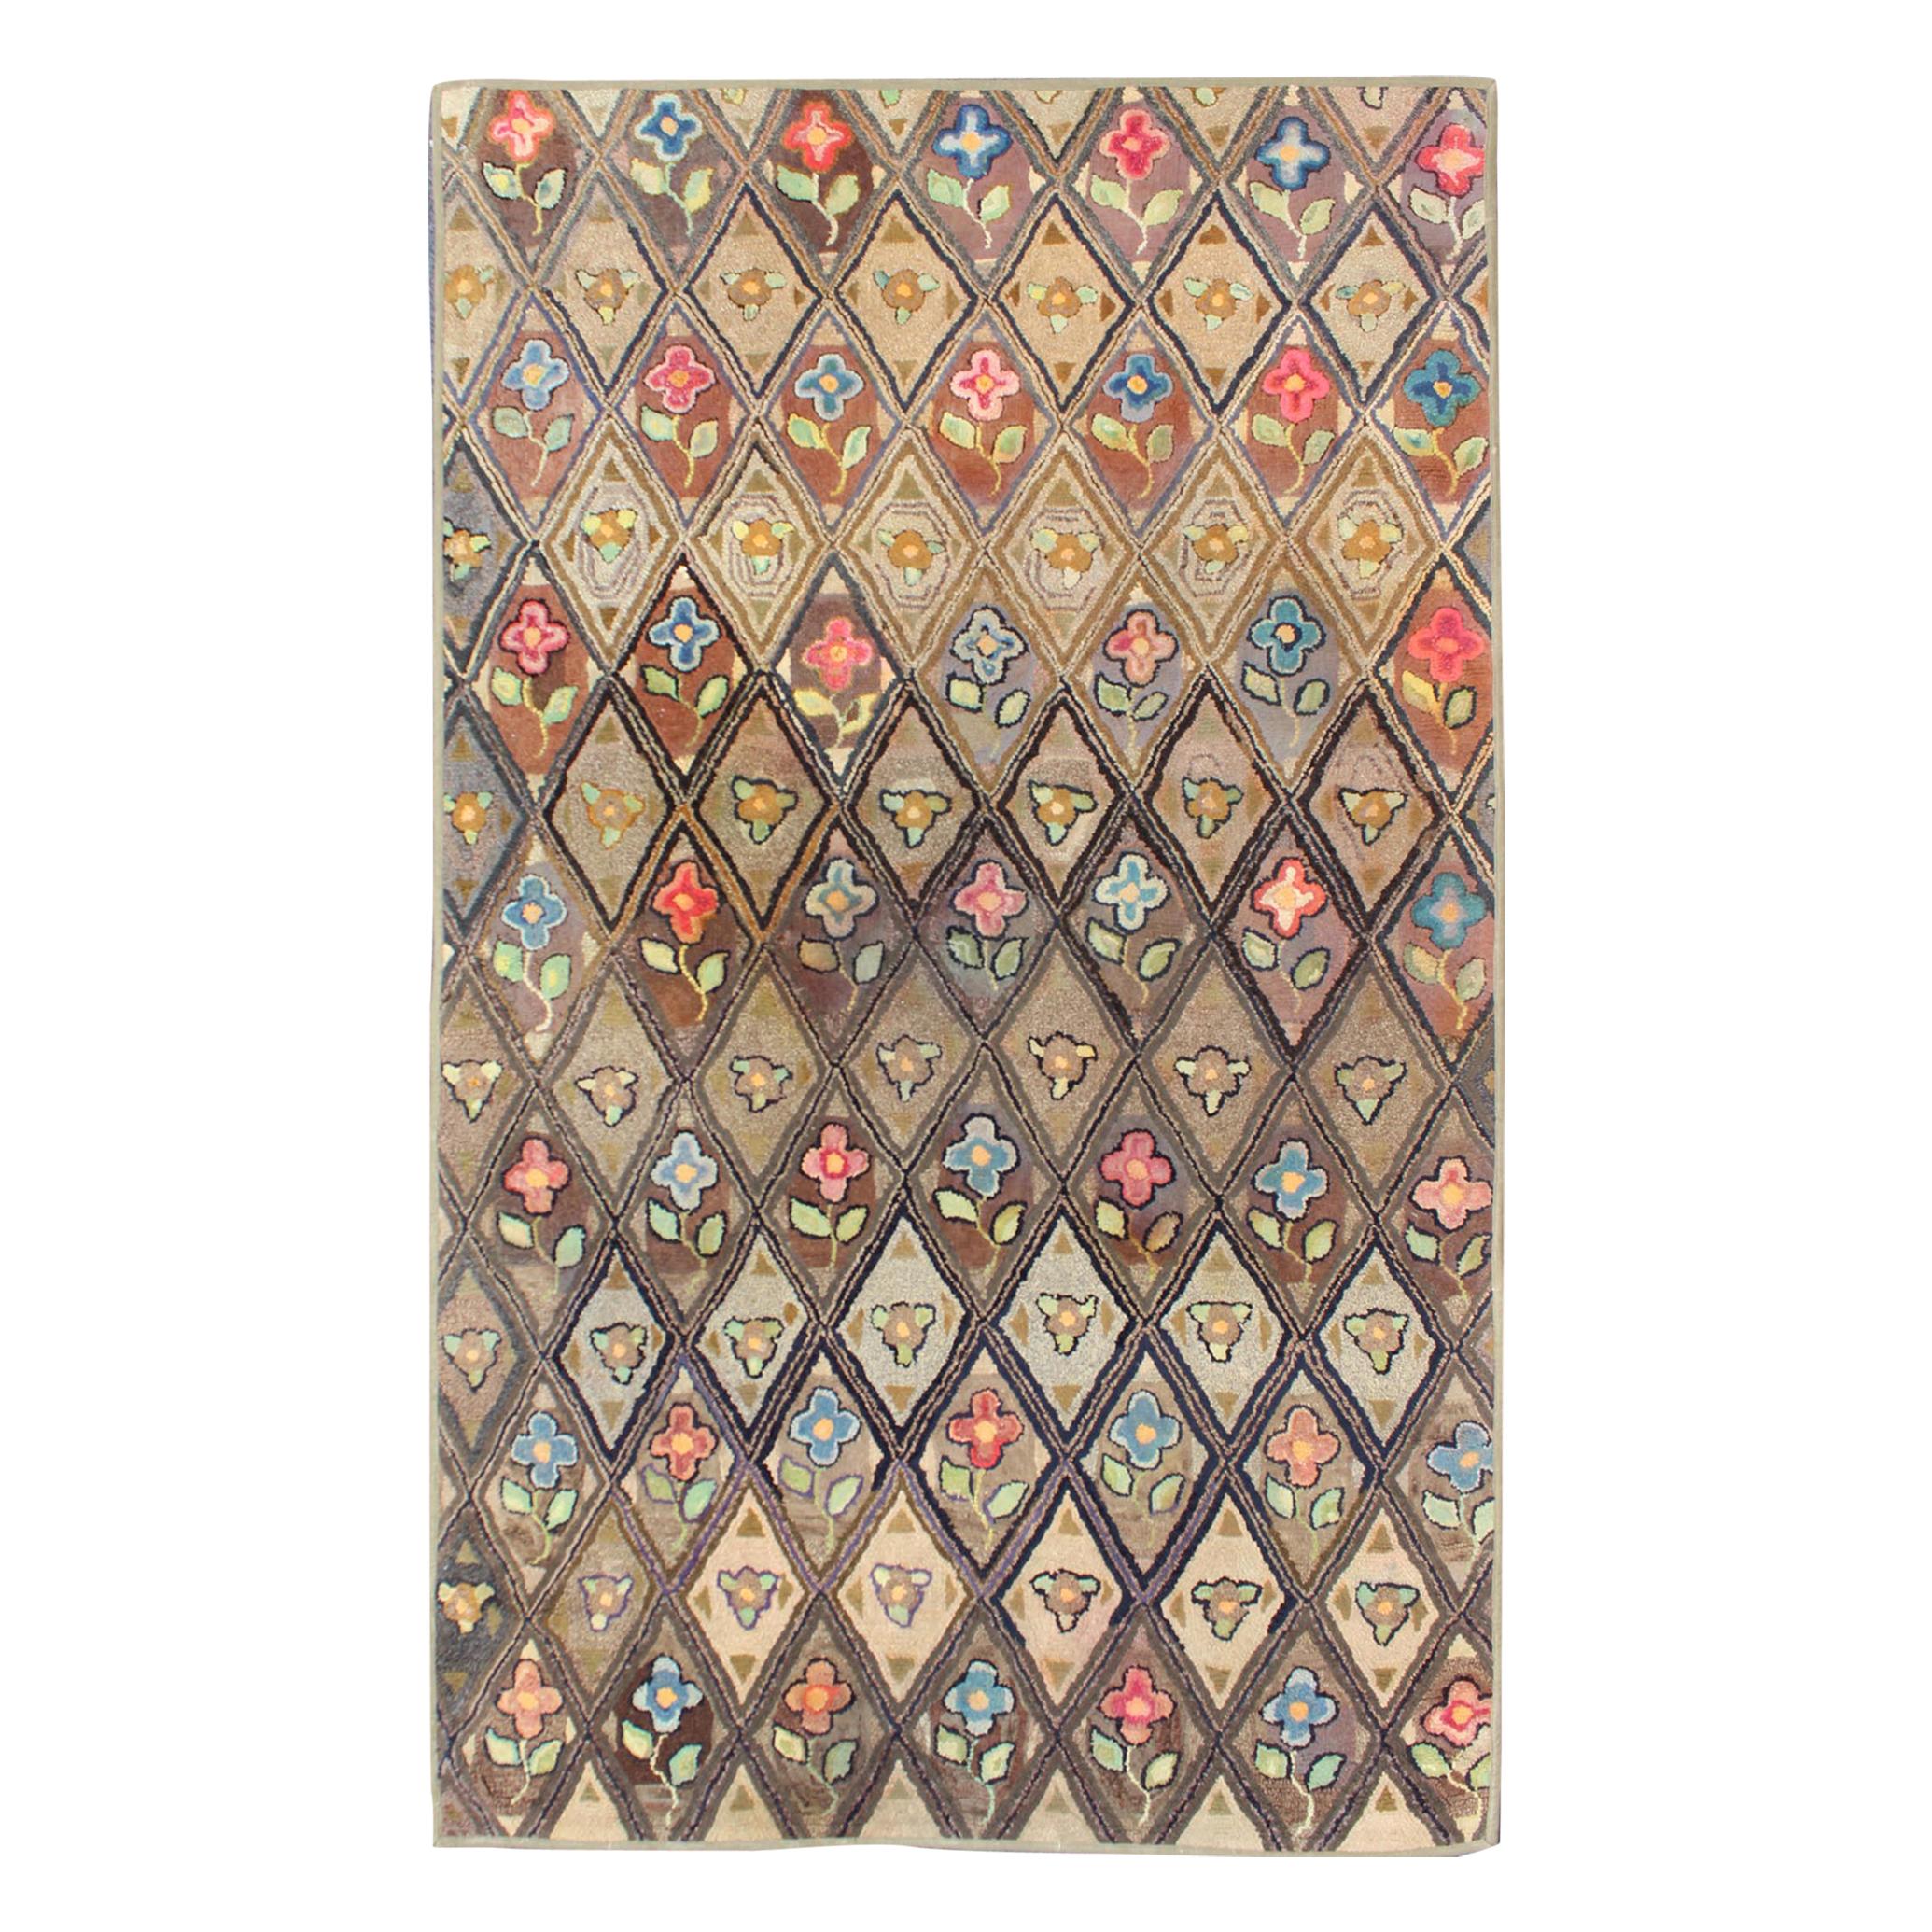 Outstanding Antique American Hooked Rug with Diamond Floral Design For Sale